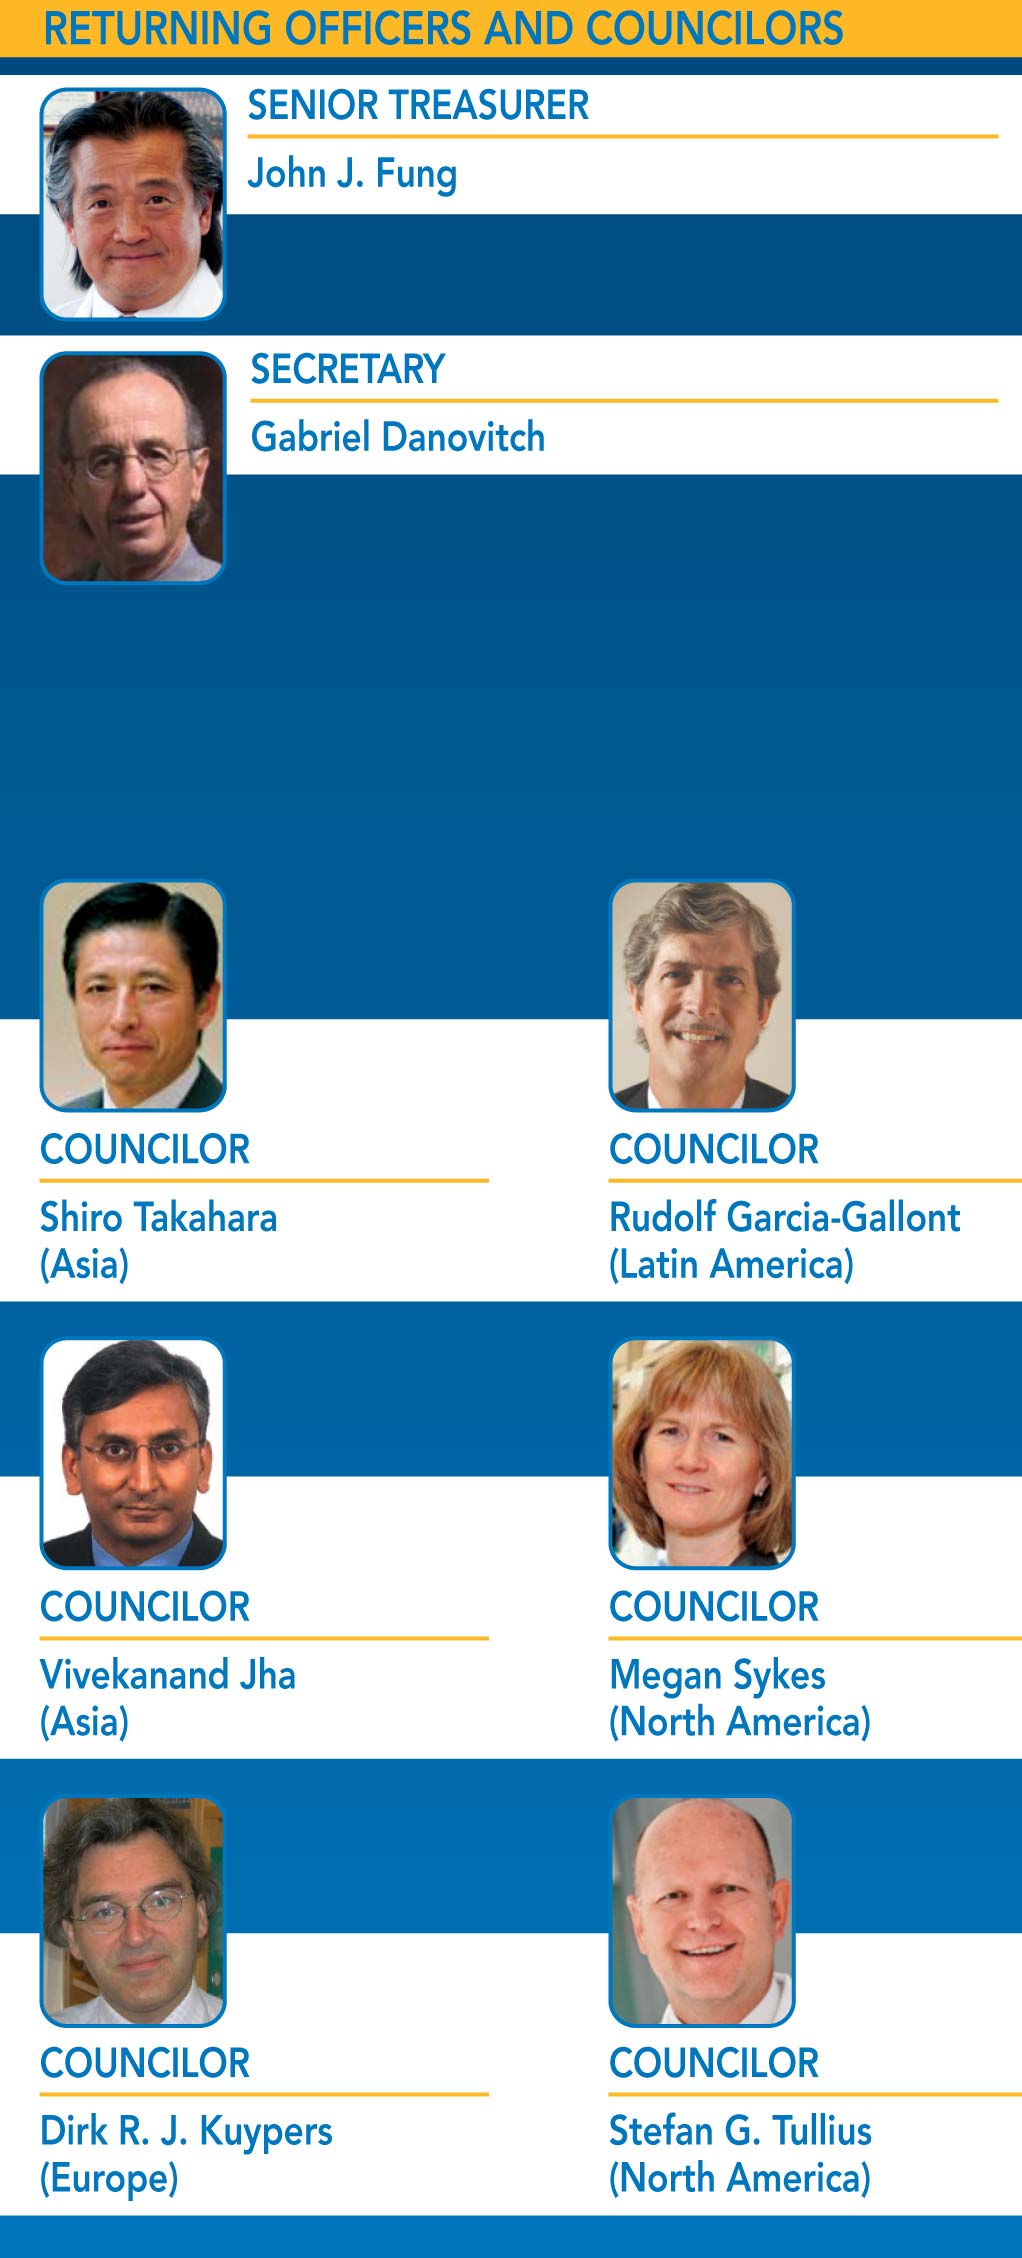 NEW COUNCIL POSITIONS FOR 2014–2016